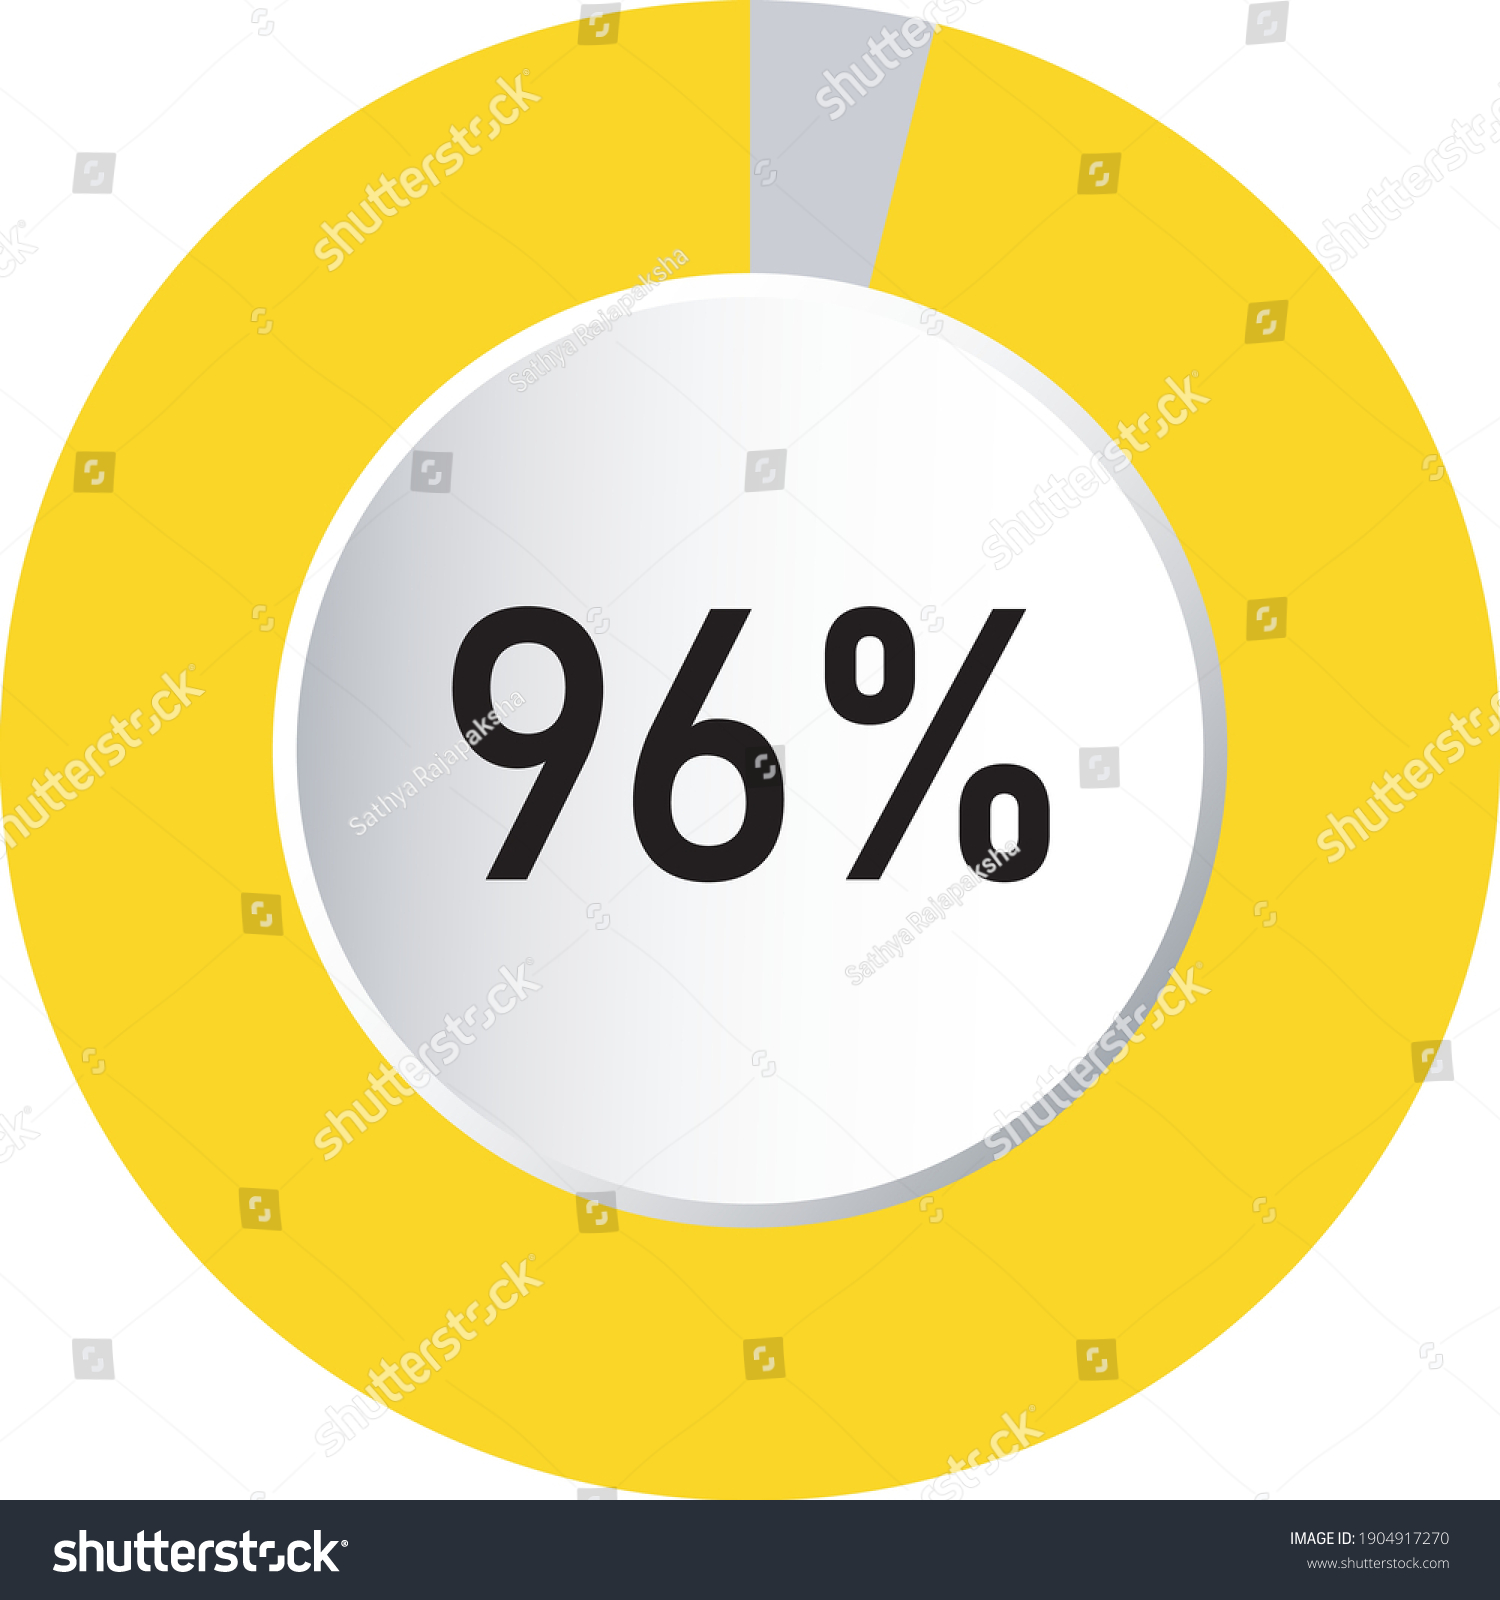 SVG of circle percentage 3d diagrams showing 96% ready-to-use for web design, user interface (UI) or infographic - indicator with yellow svg